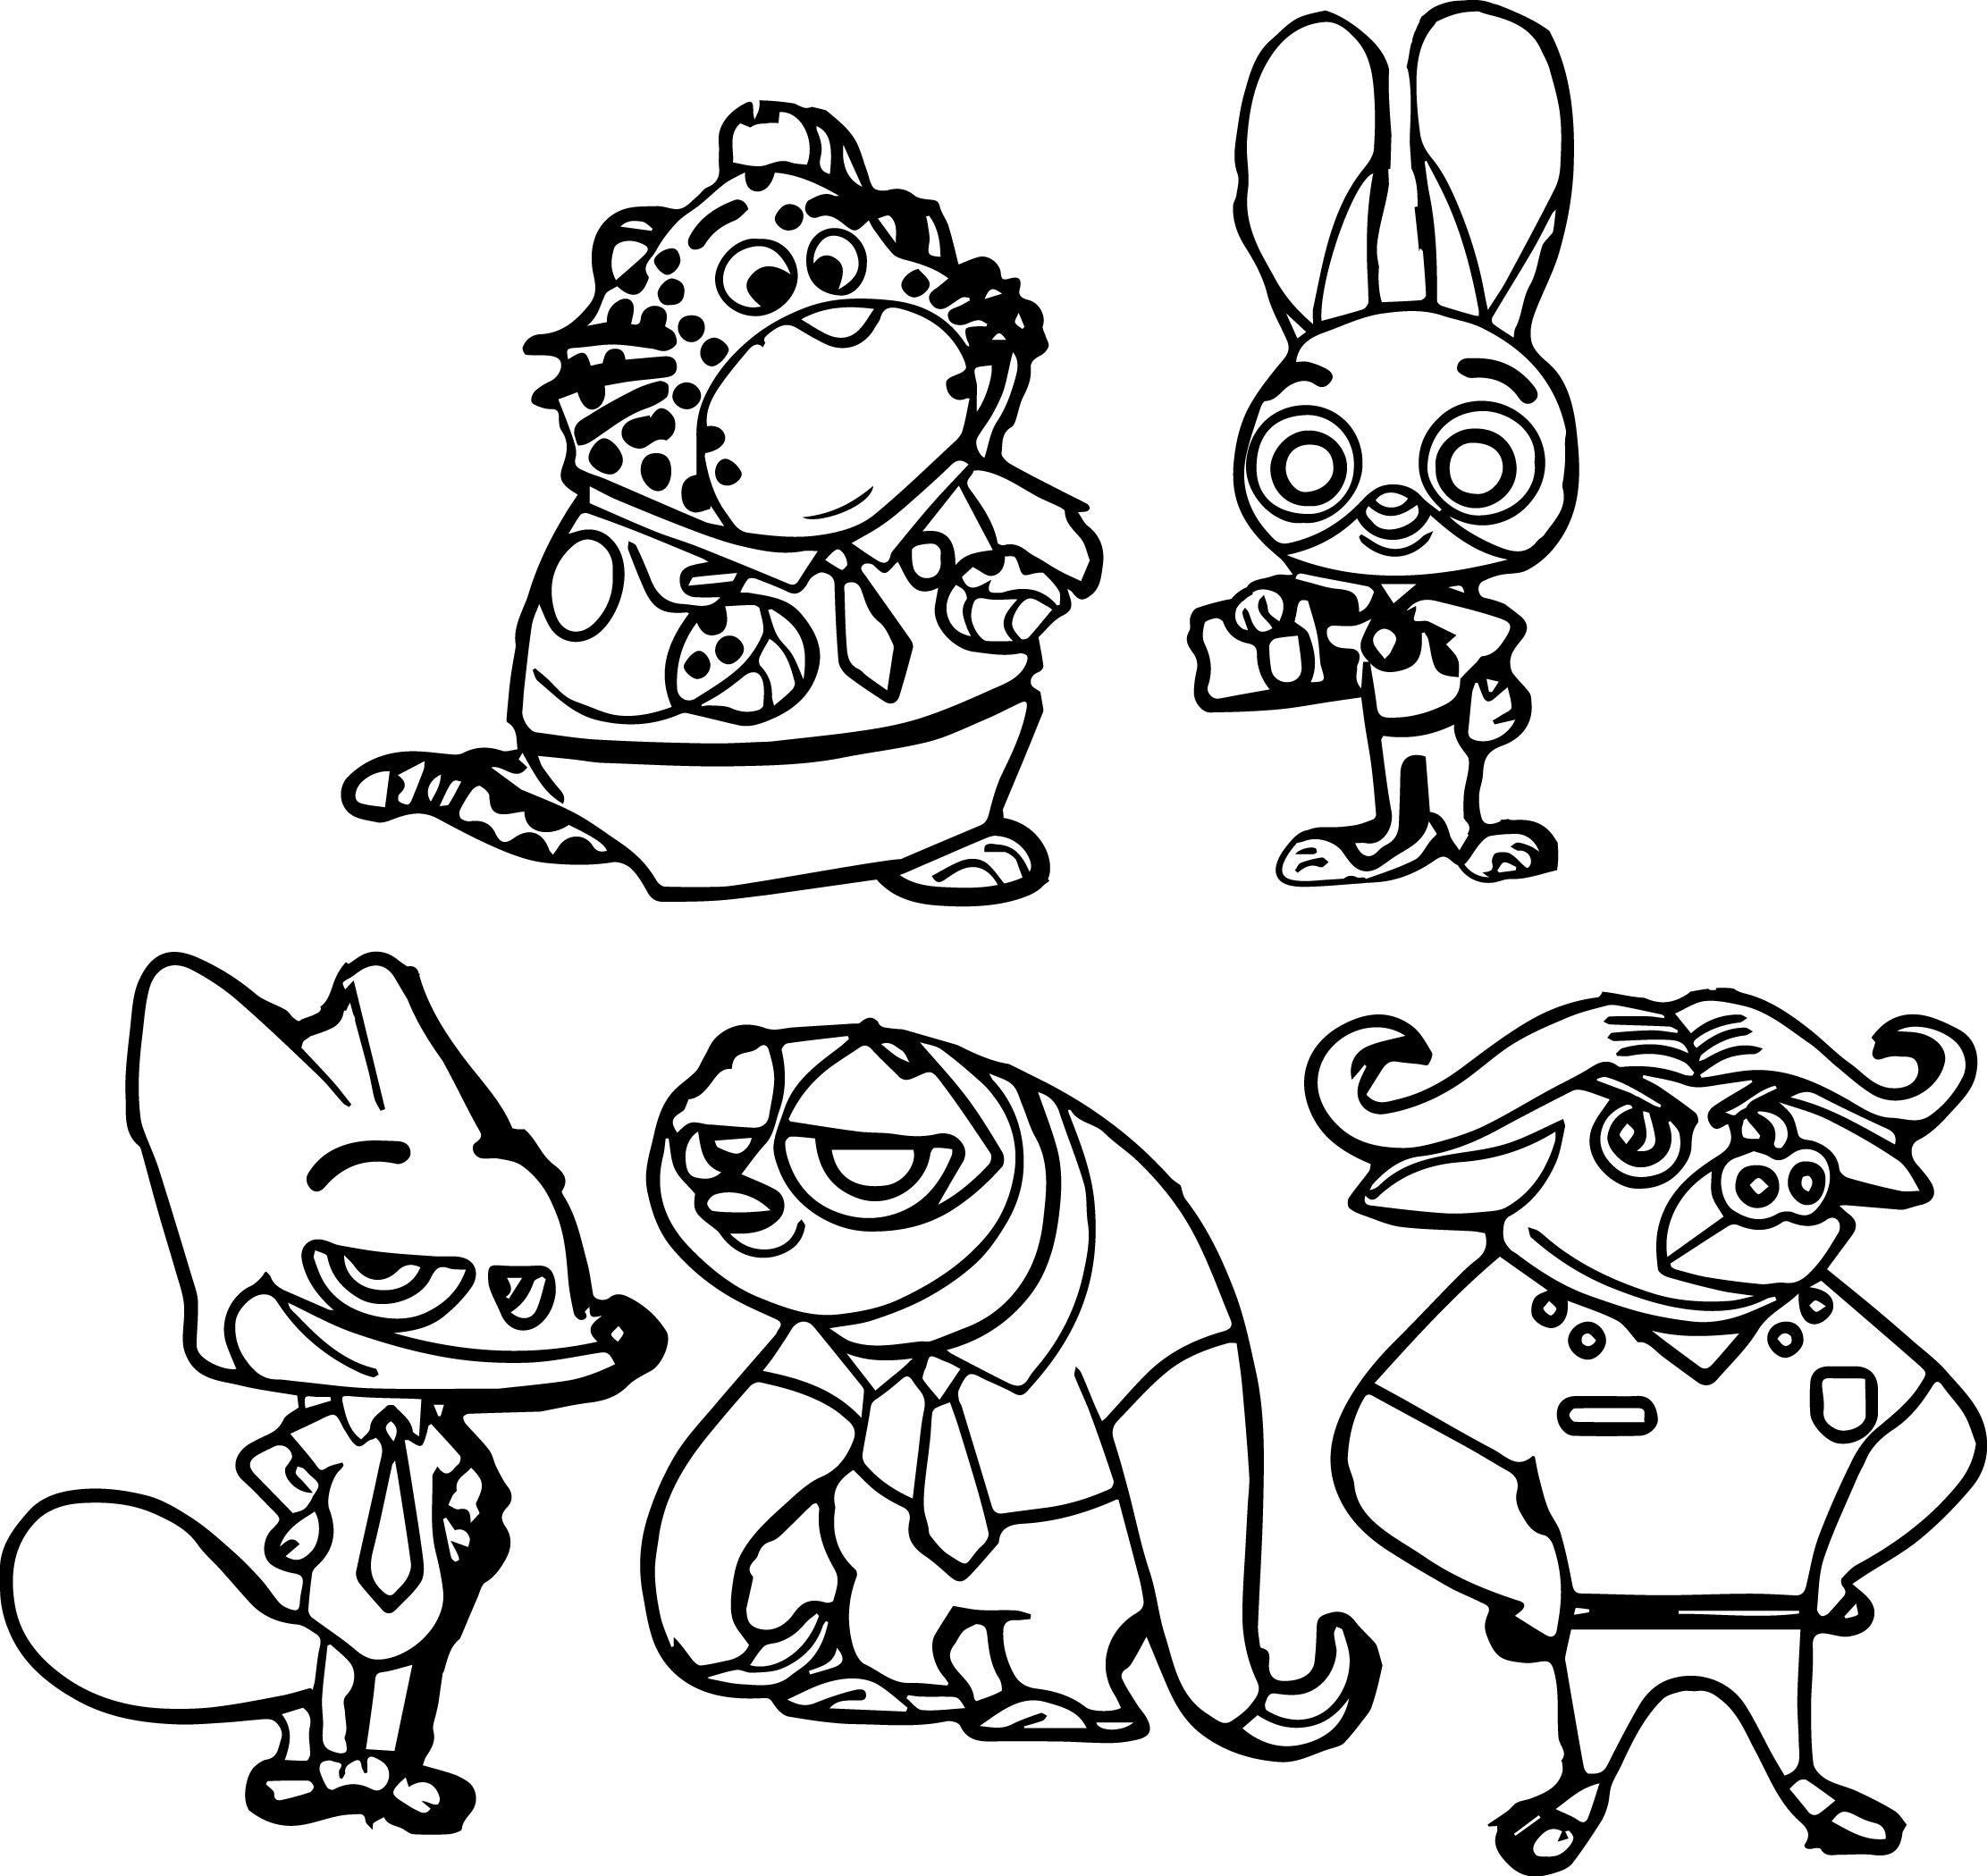 Nick Jr Coloring Book To Print Out Coloring Pages - vrogue.co